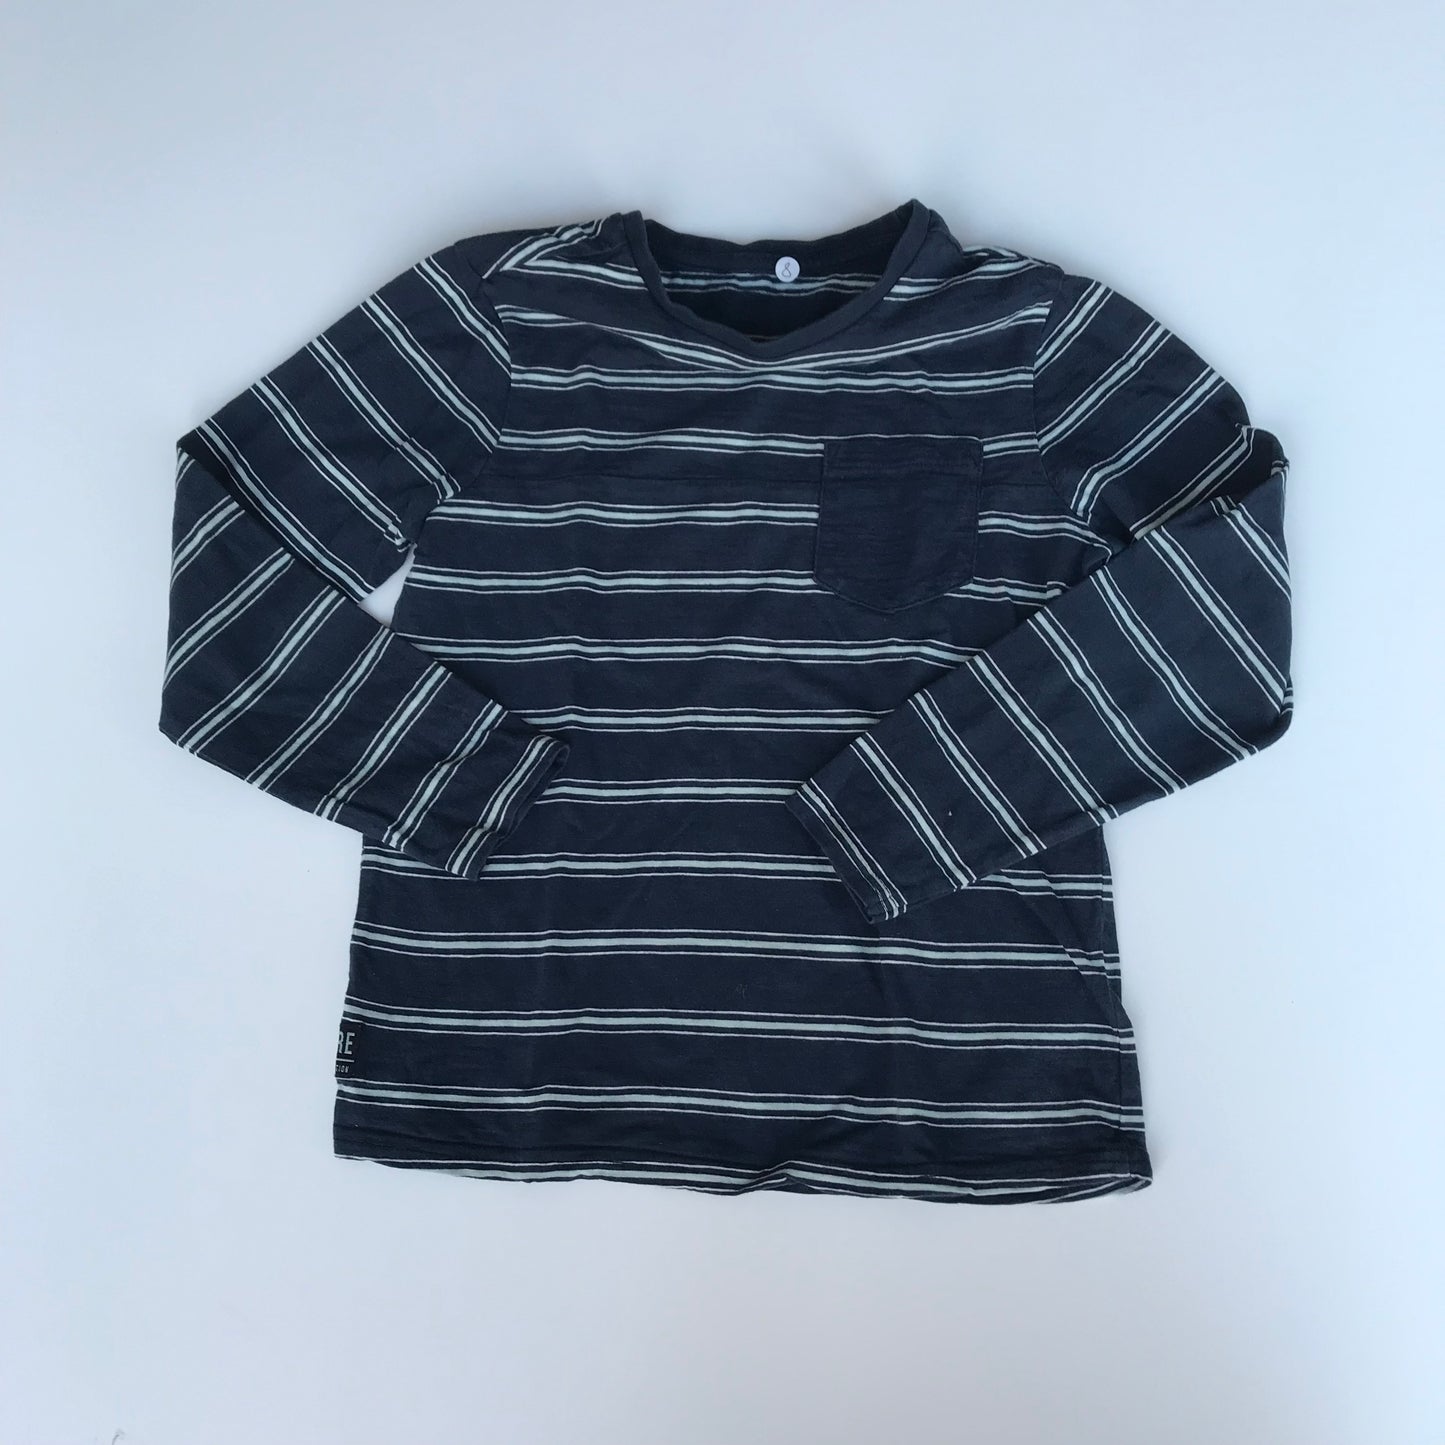 Navy Striped with Pocket Long Sleeve T-Shirt Age 8